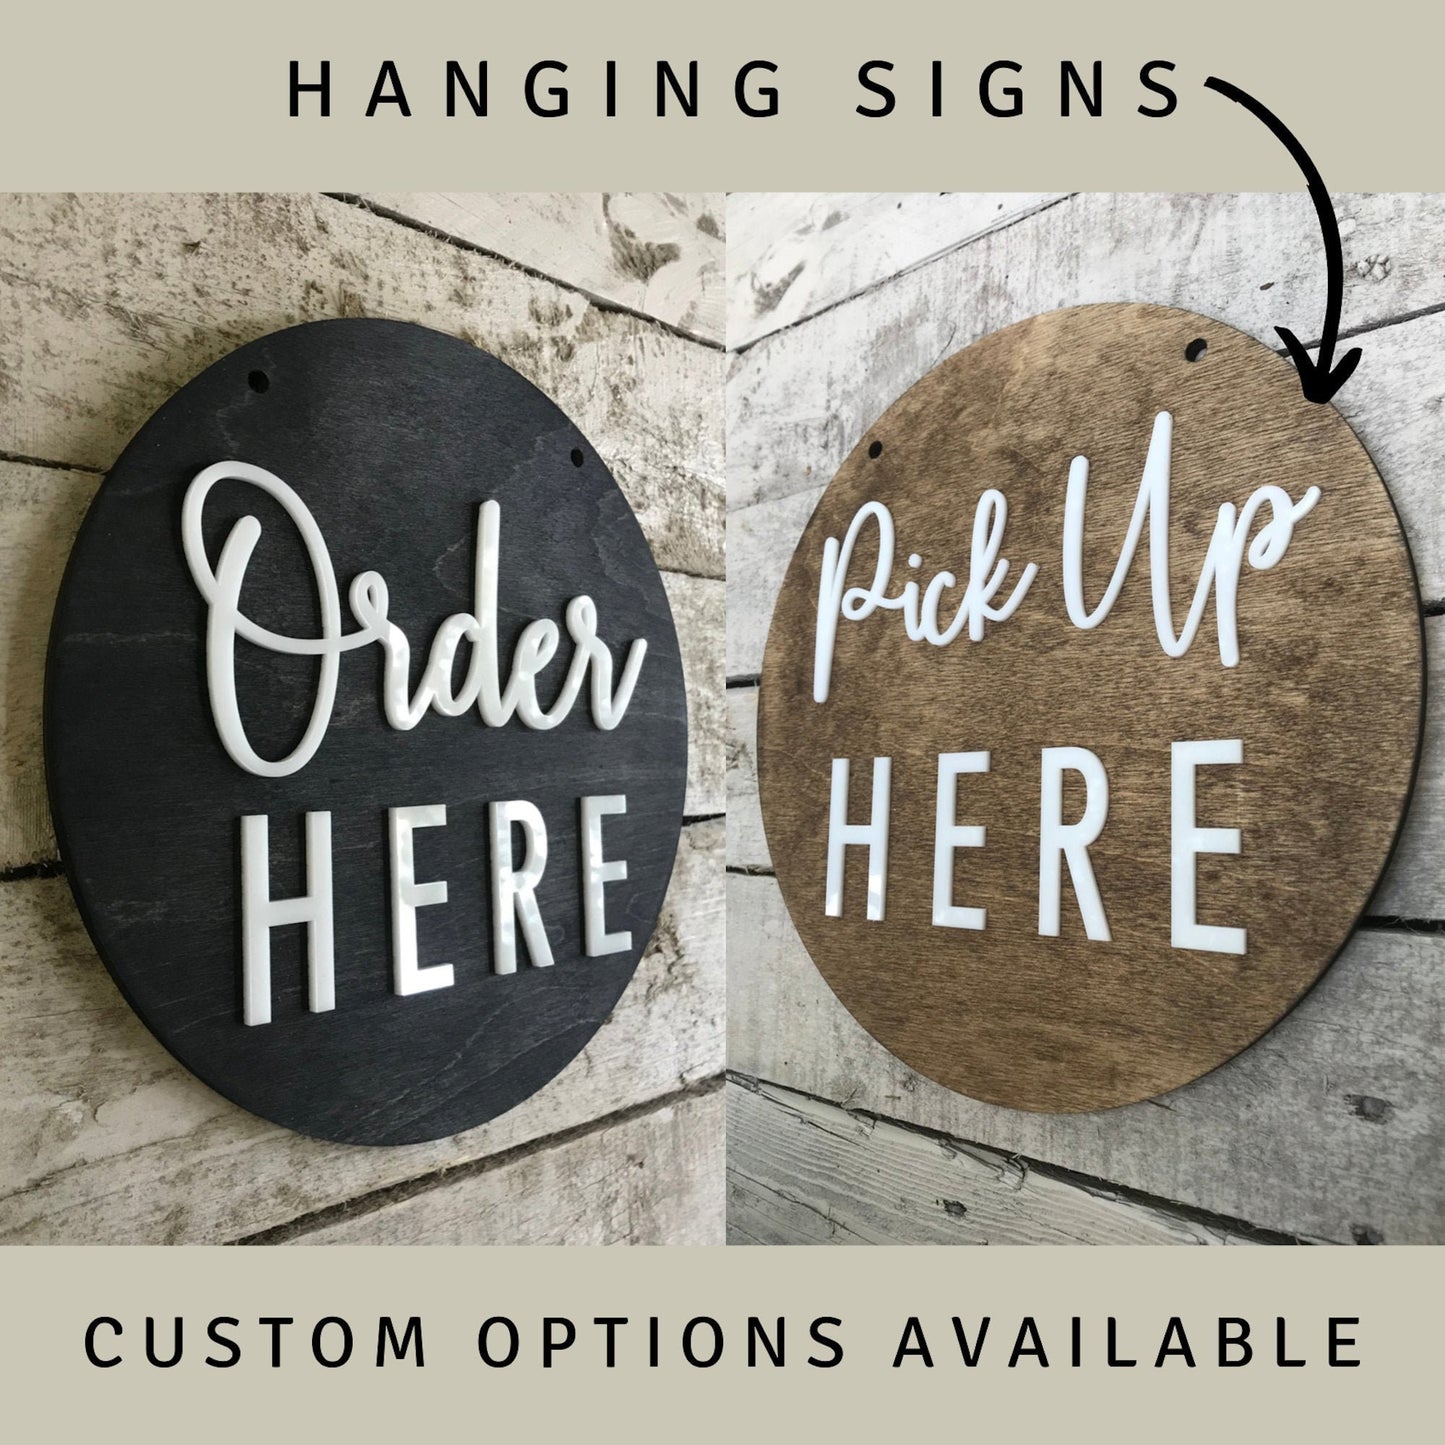 20x20" Order Here Pick up Here Business LARGE Sign | Custom COFFEE SHOP Restaurant Bakery Ice Cream | Cafe Decor Window Display